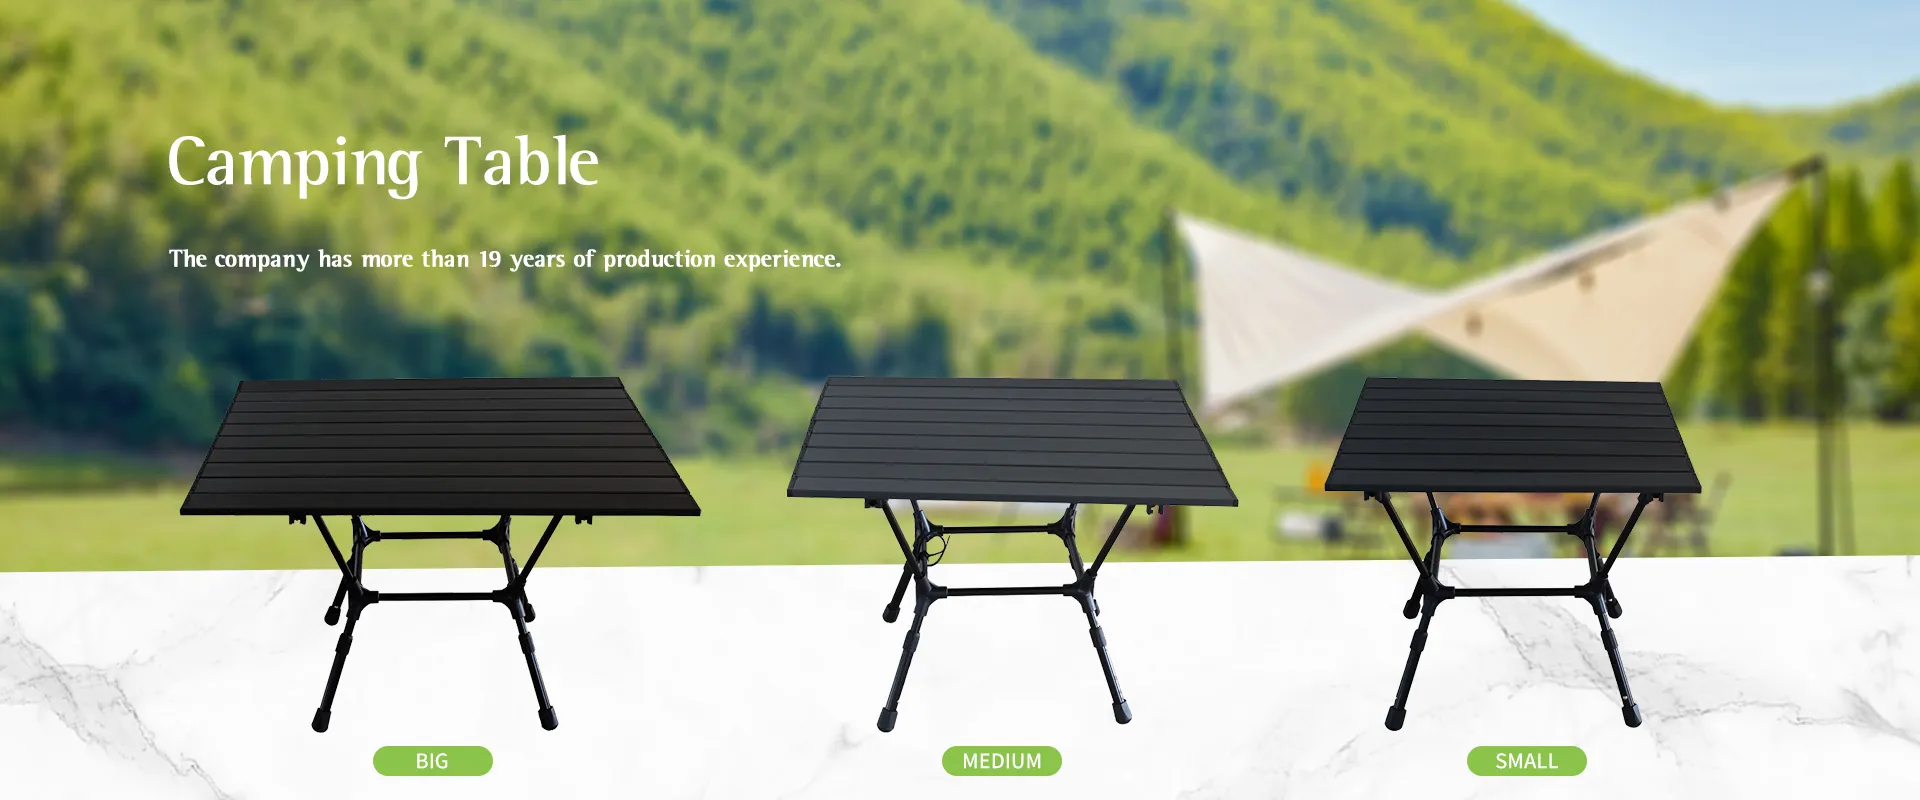 China Camping Table Manufacturer